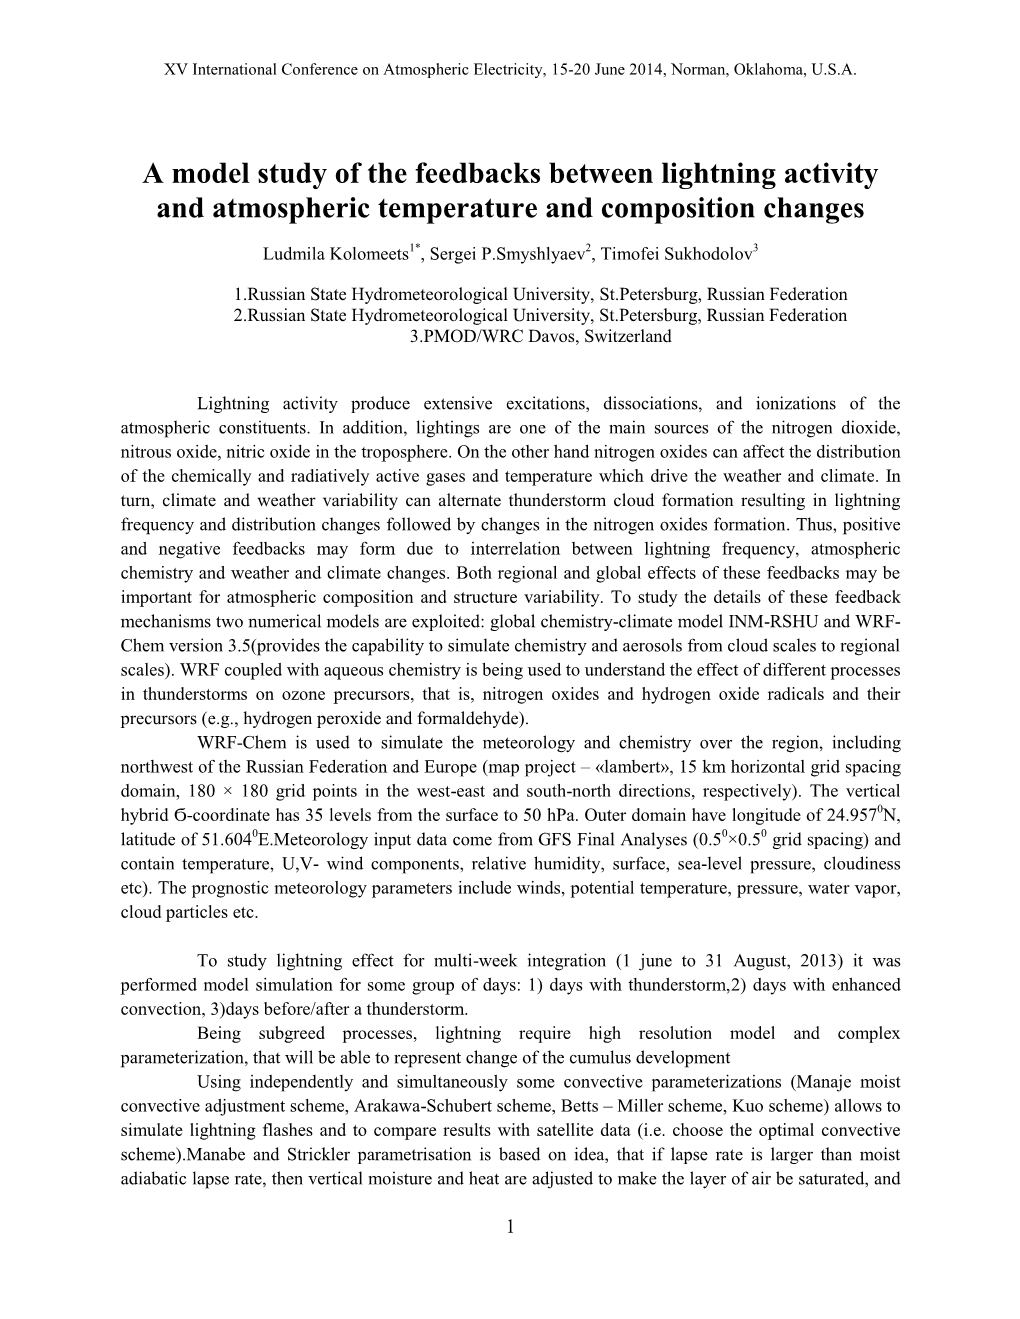 A Model Study of the Feedbacks Between Lightning Activity and Atmospheric Temperature and Composition Changes